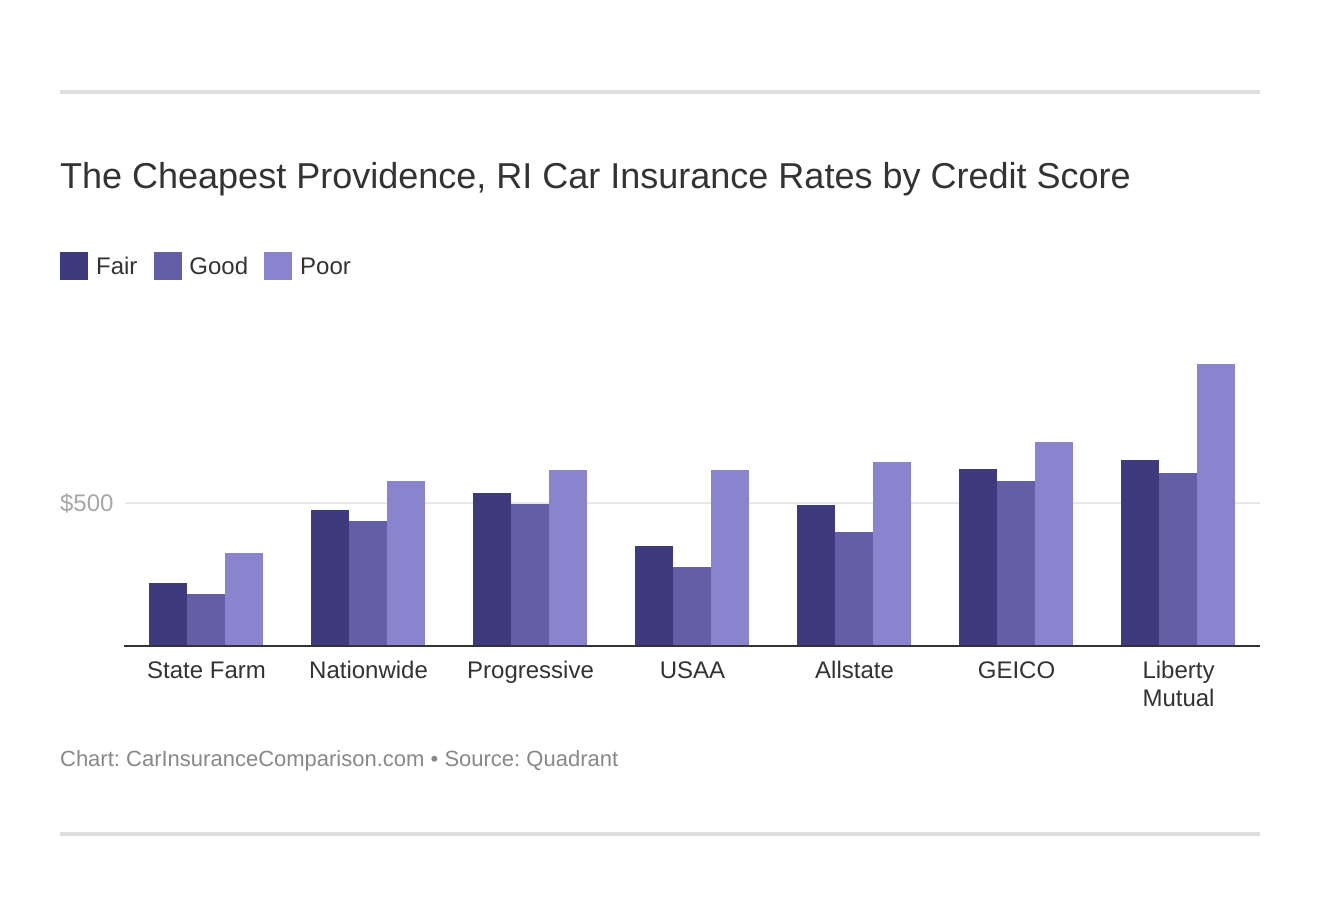 The Cheapest Providence, RI Car Insurance Rates by Credit Score